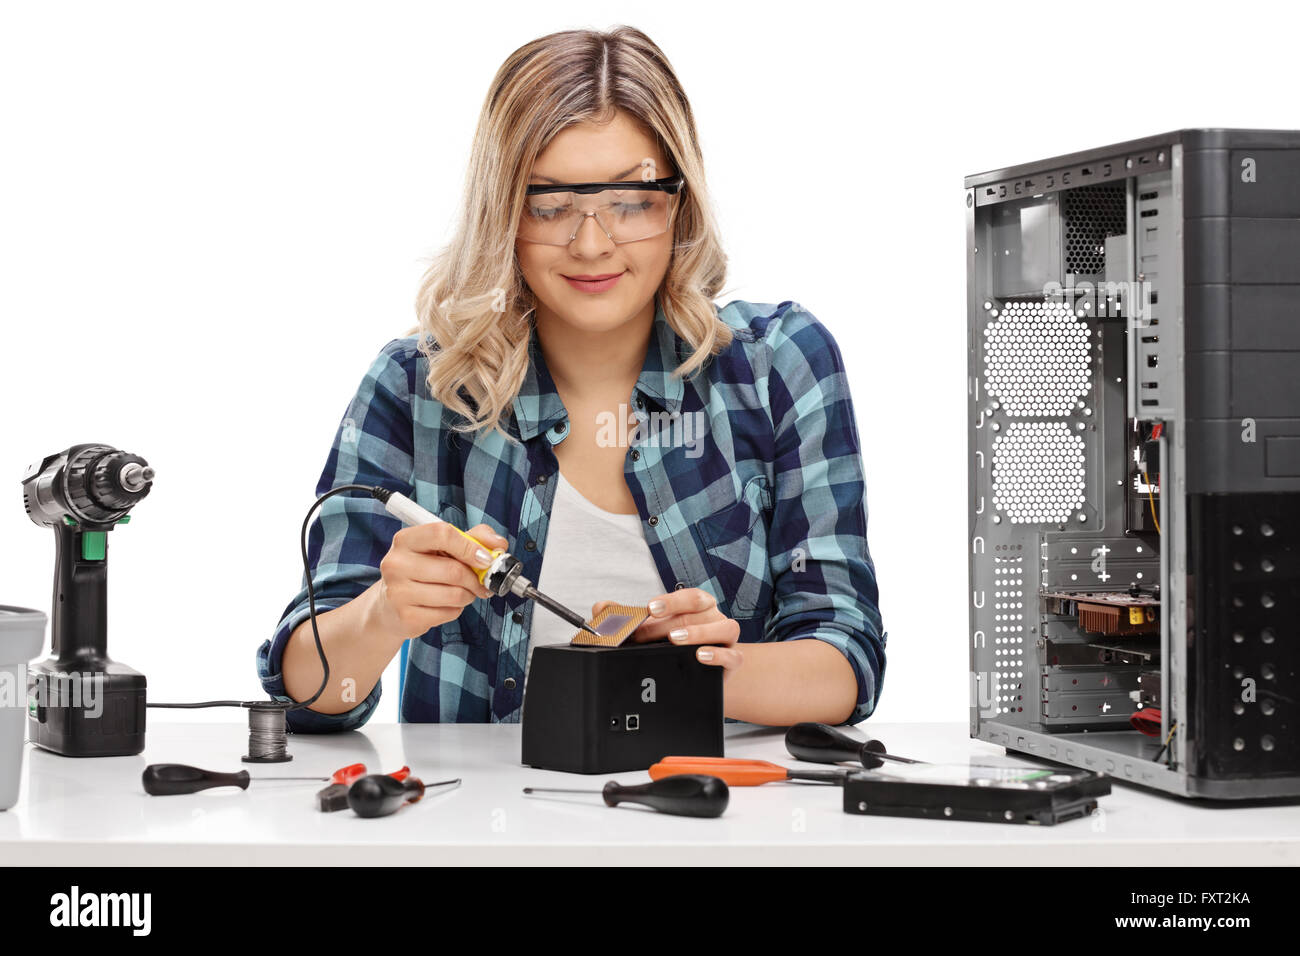 Female PC technician soldering a chip from a desktop computer isolated on white background Stock Photo